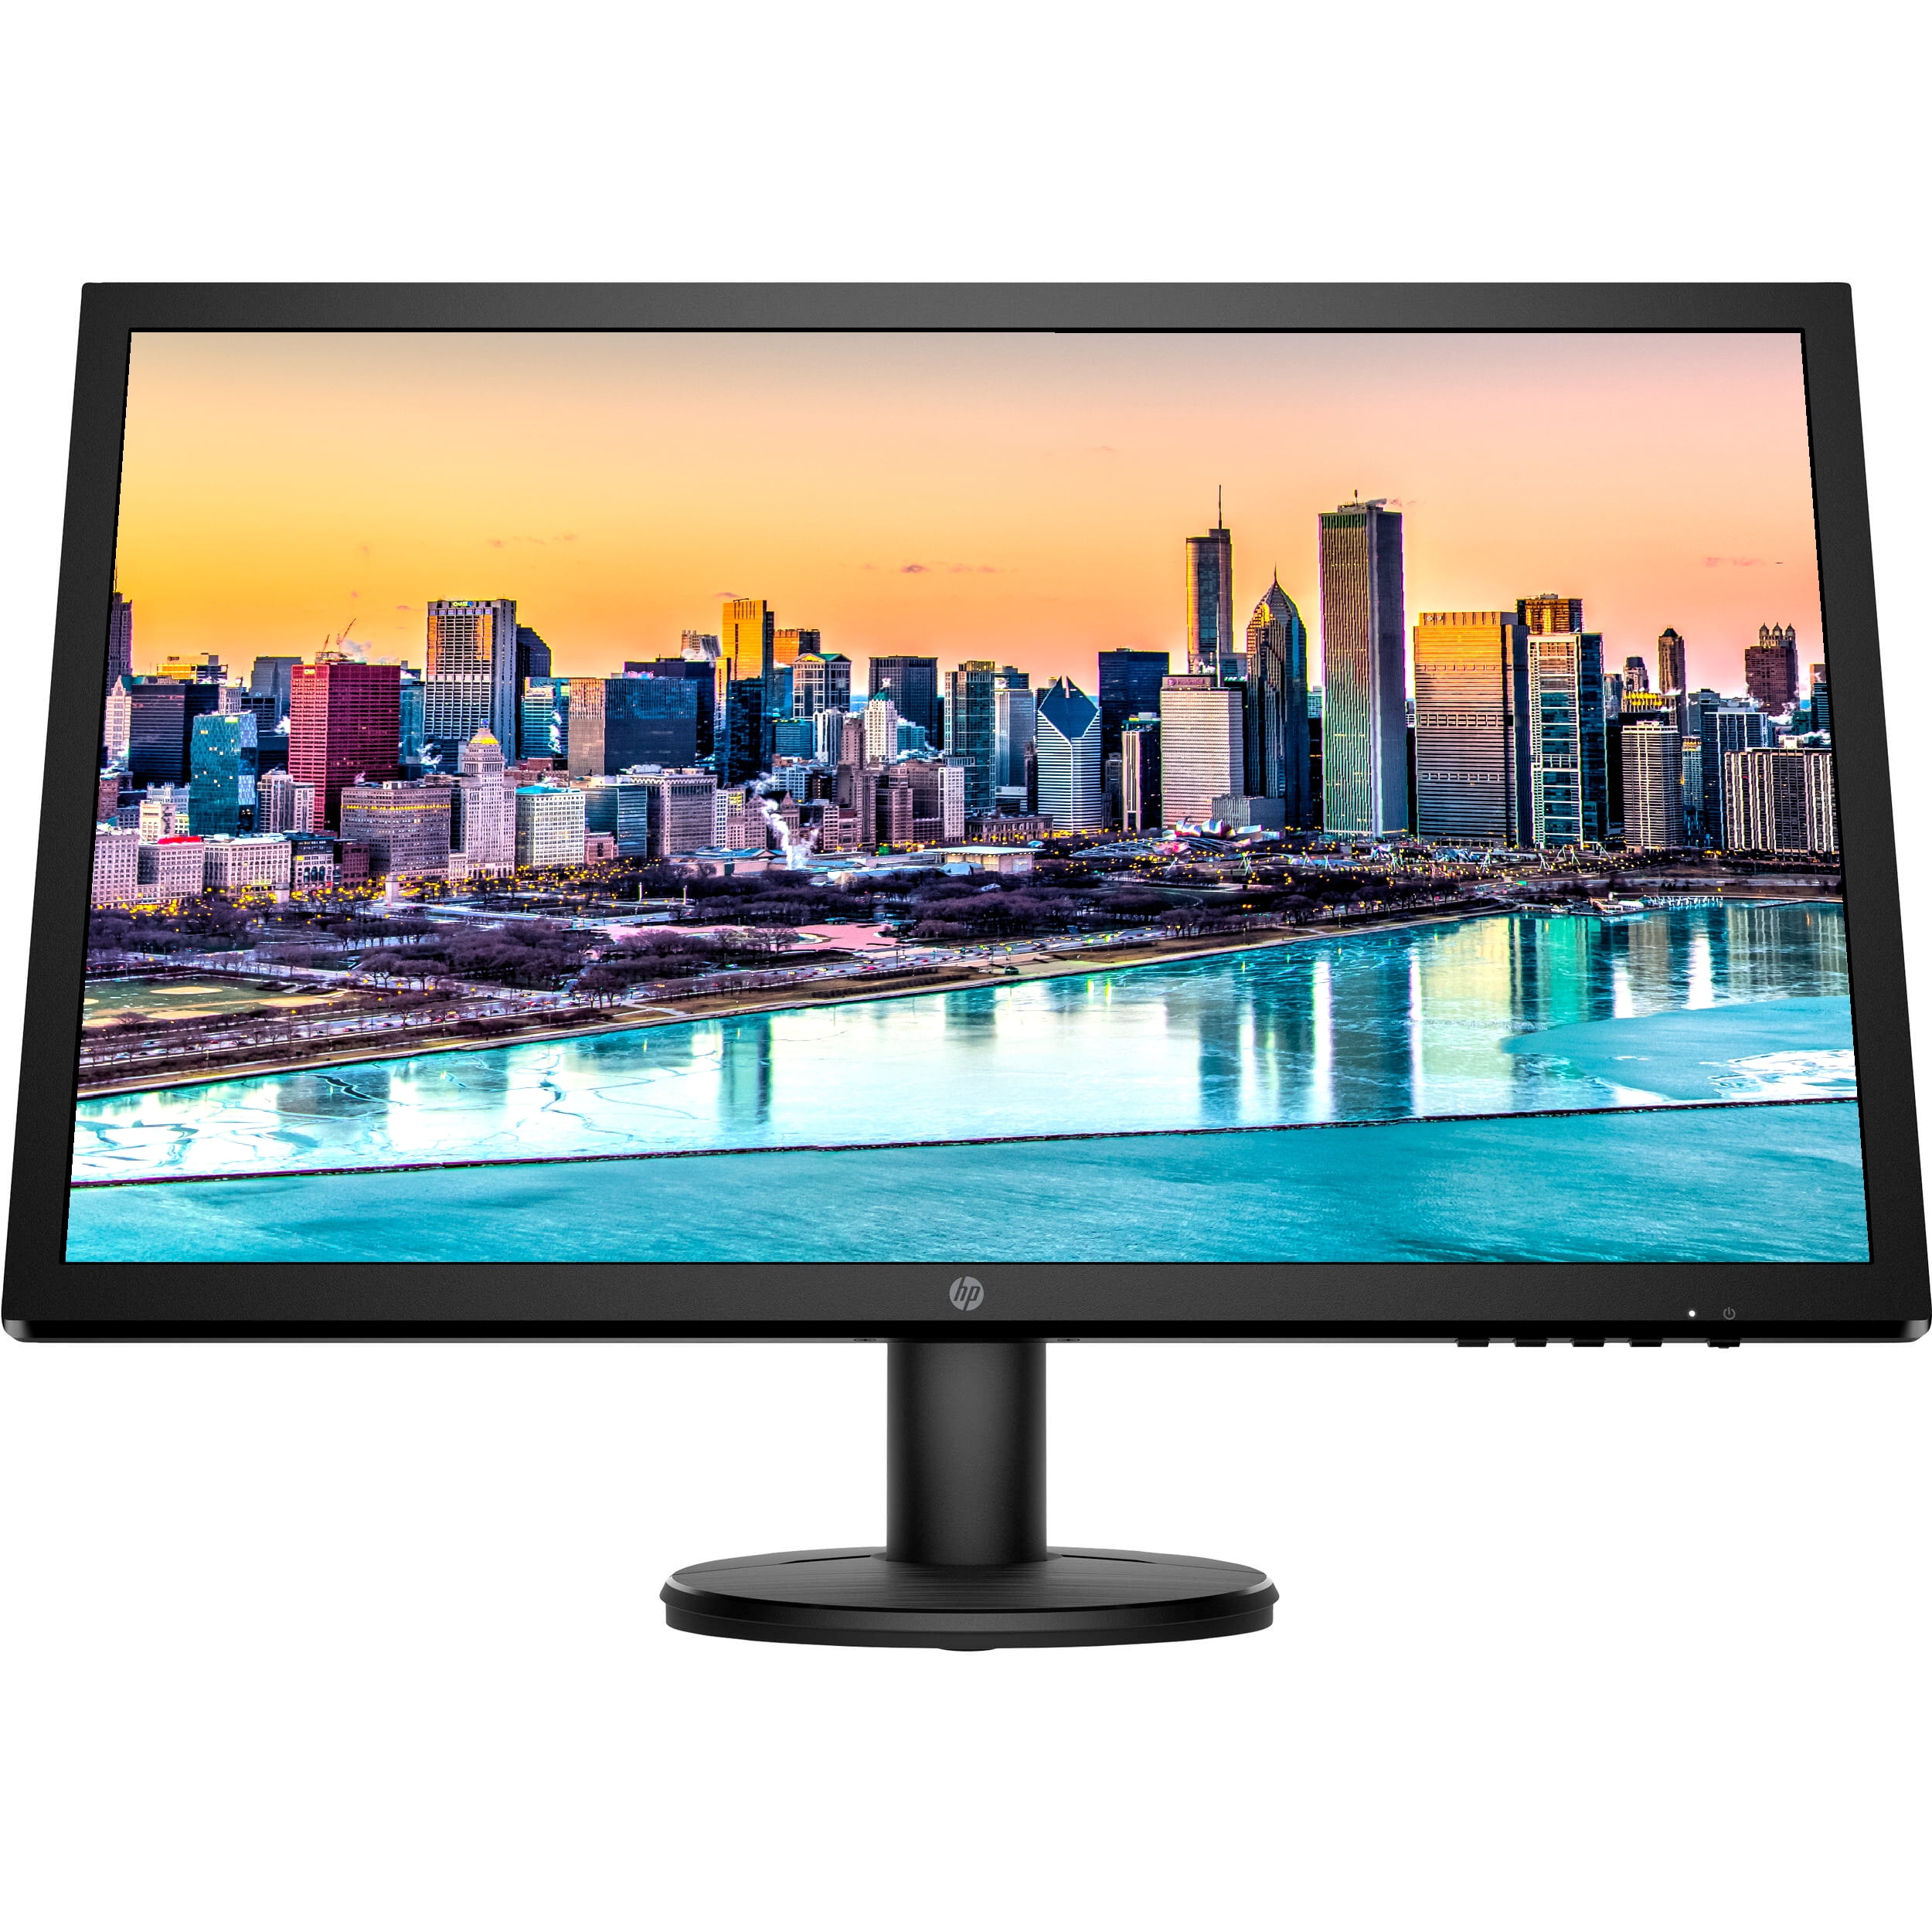 HP V24 24 inch TN Full HD 1920 x 1080 LED Backlit LCD Monitor 2-Pack Bundle  with HDMI  VGA ports, FreeSync, 75Hz Refresh Rate, Low Blue Light, Desk  Mount Clamp Dual